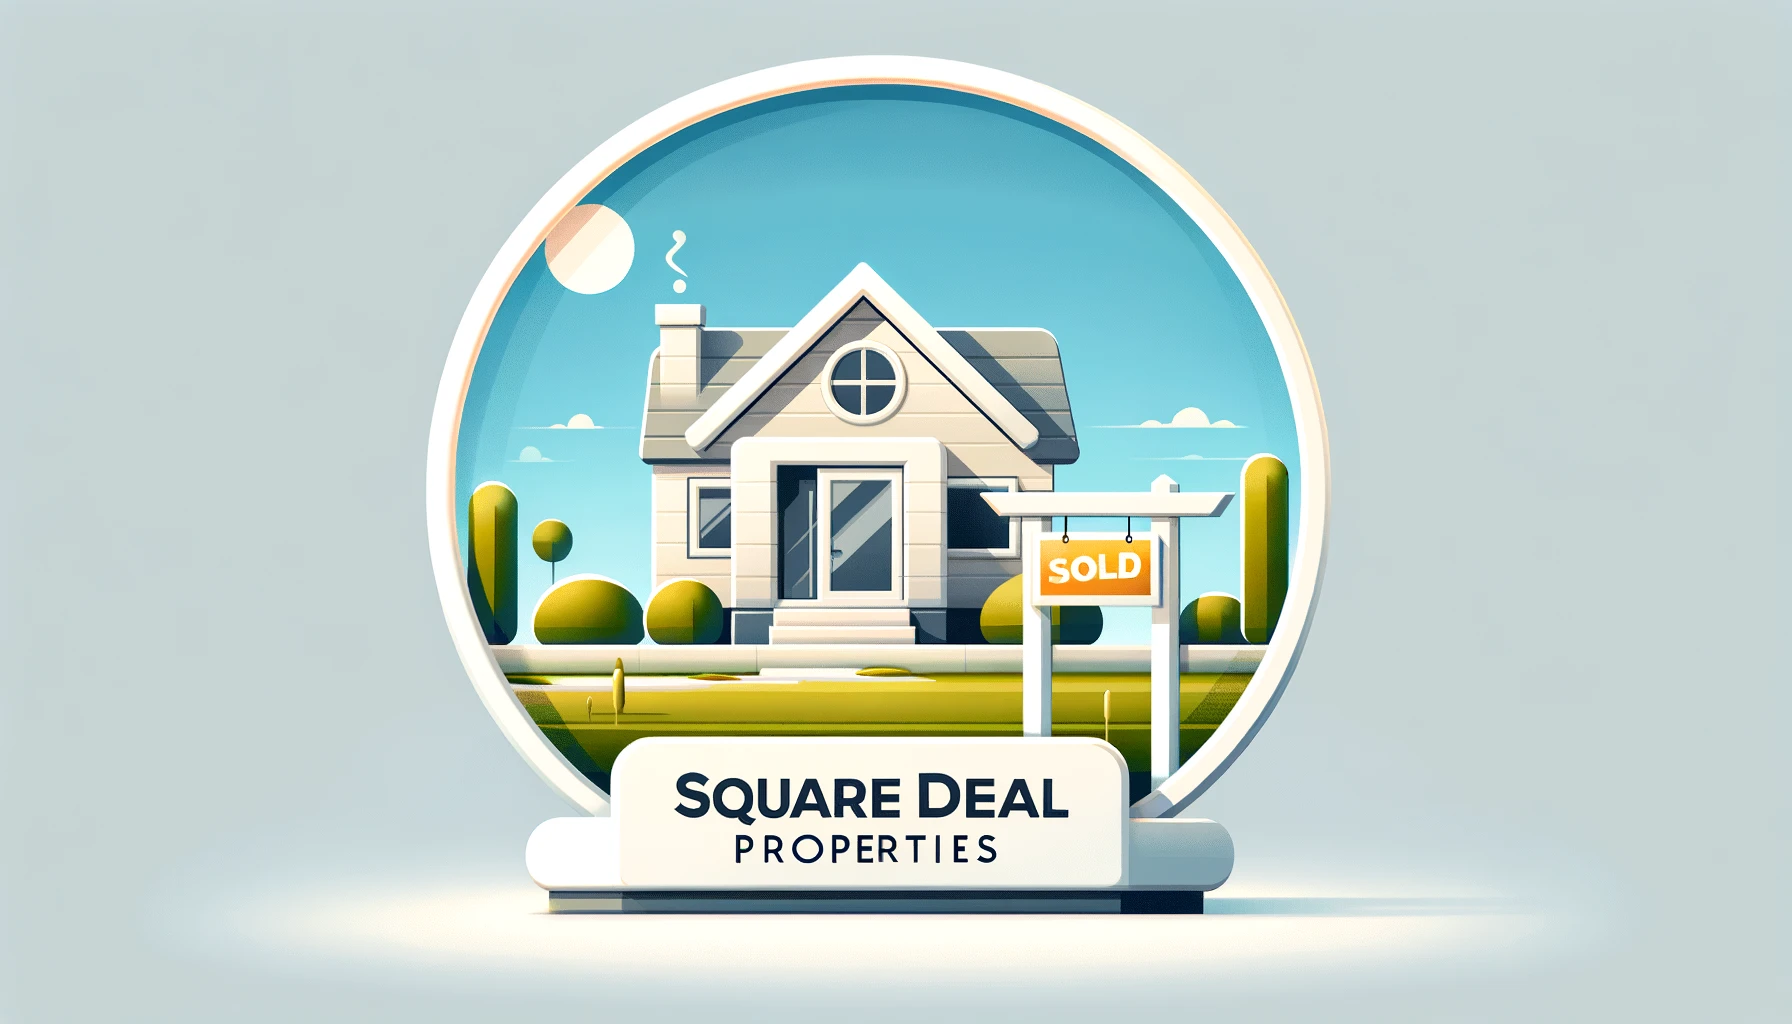 Square deal properties submission form